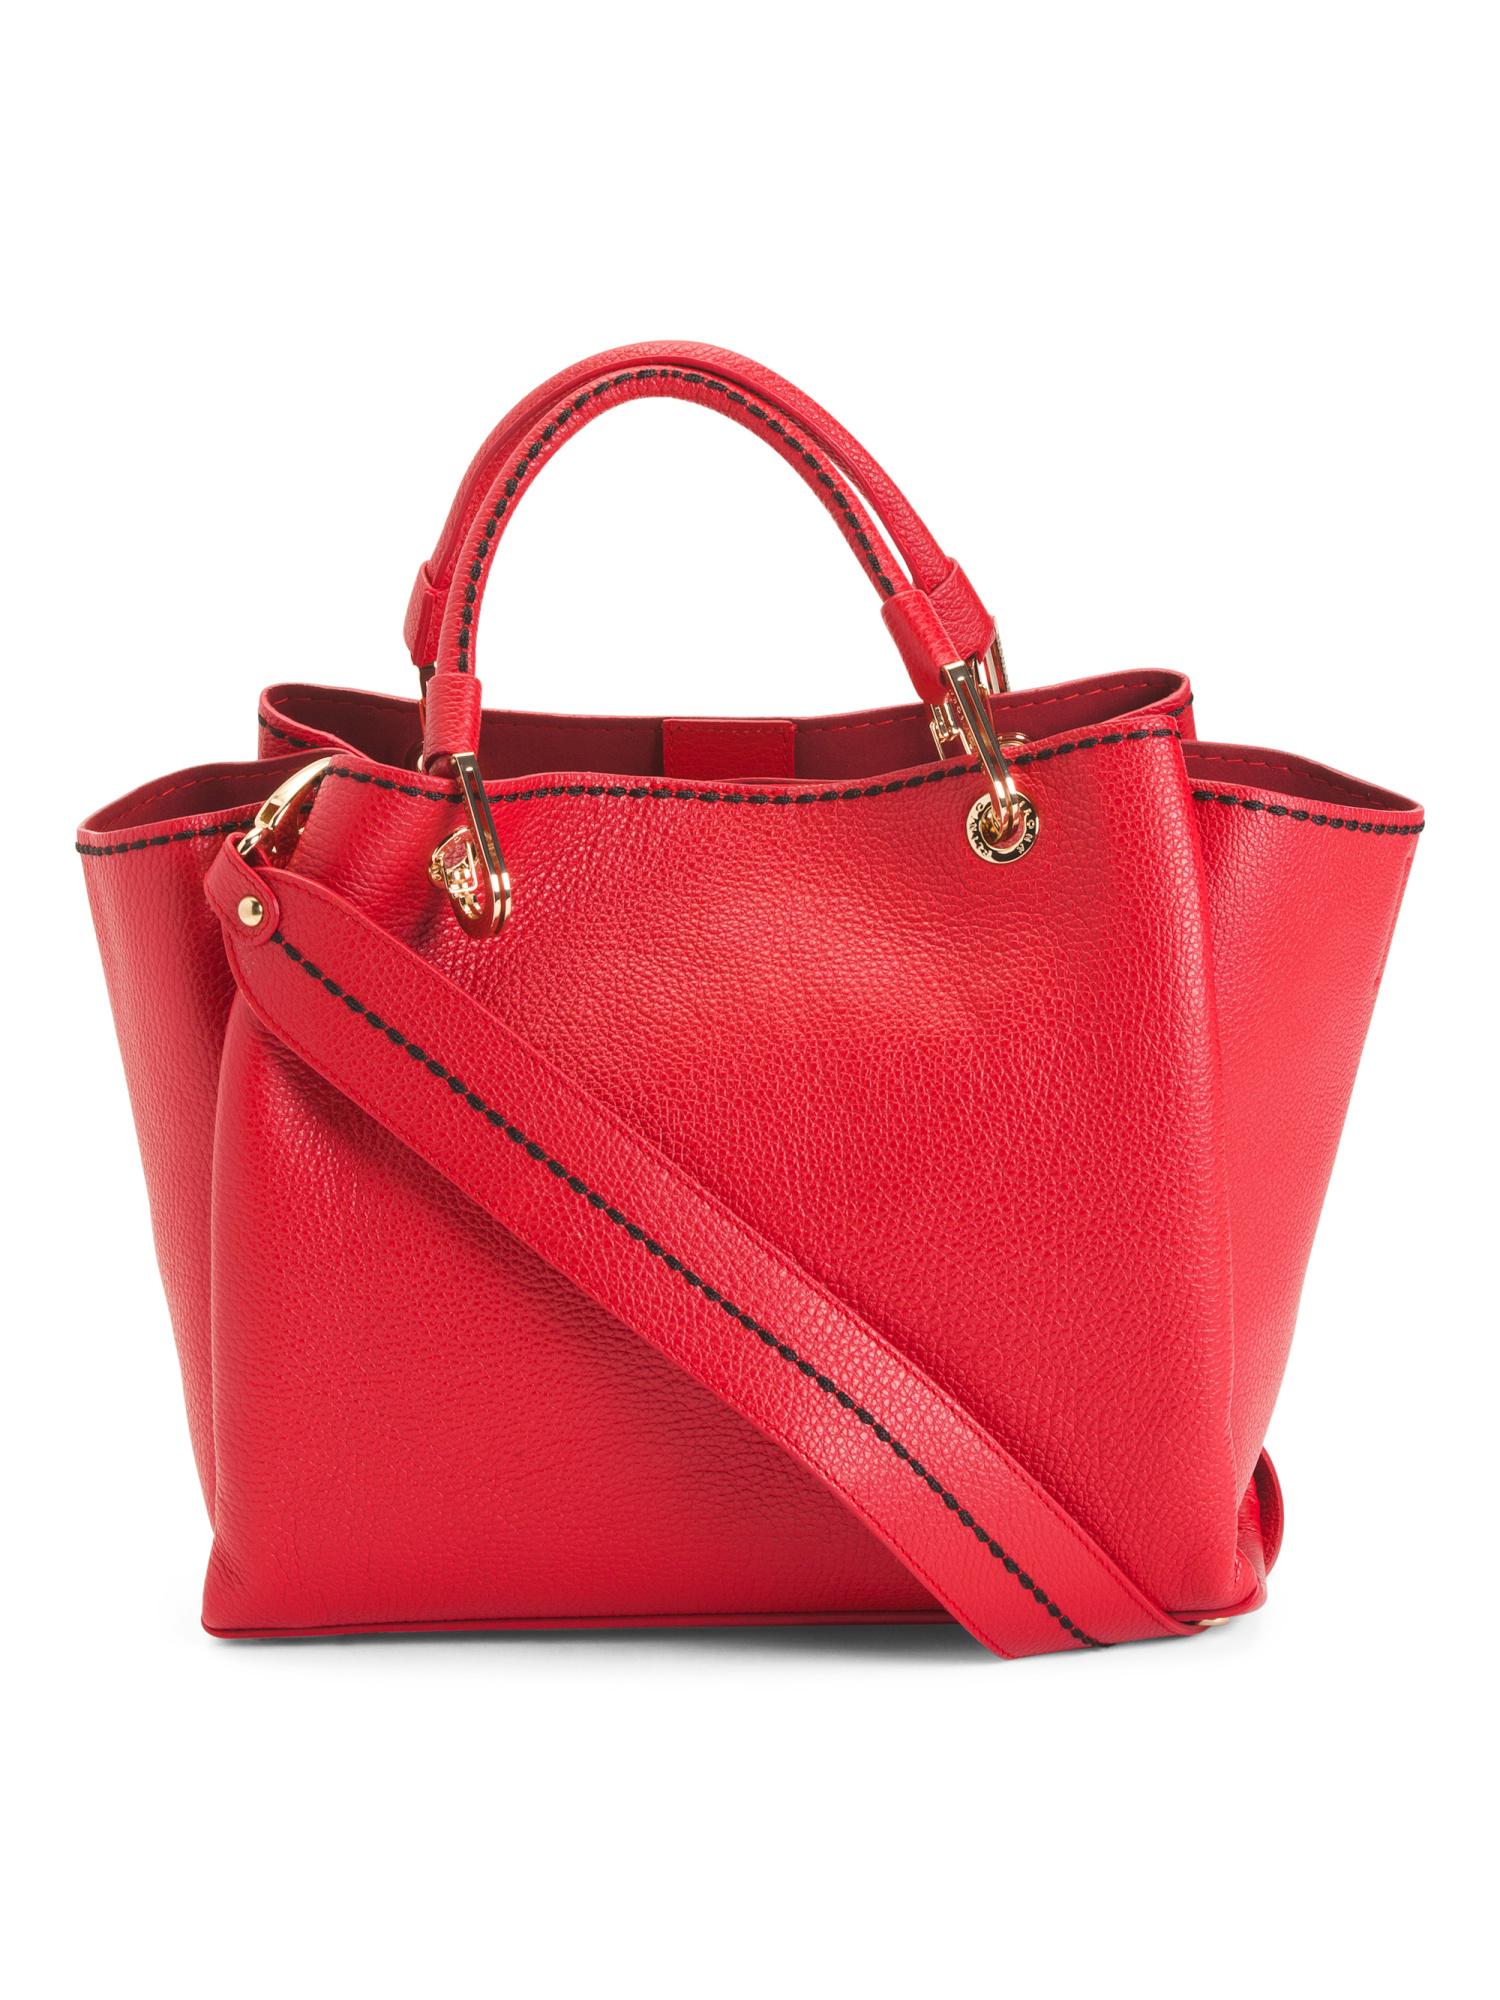 Tj Maxx Made In Italy Leather Satchel in Red - Lyst